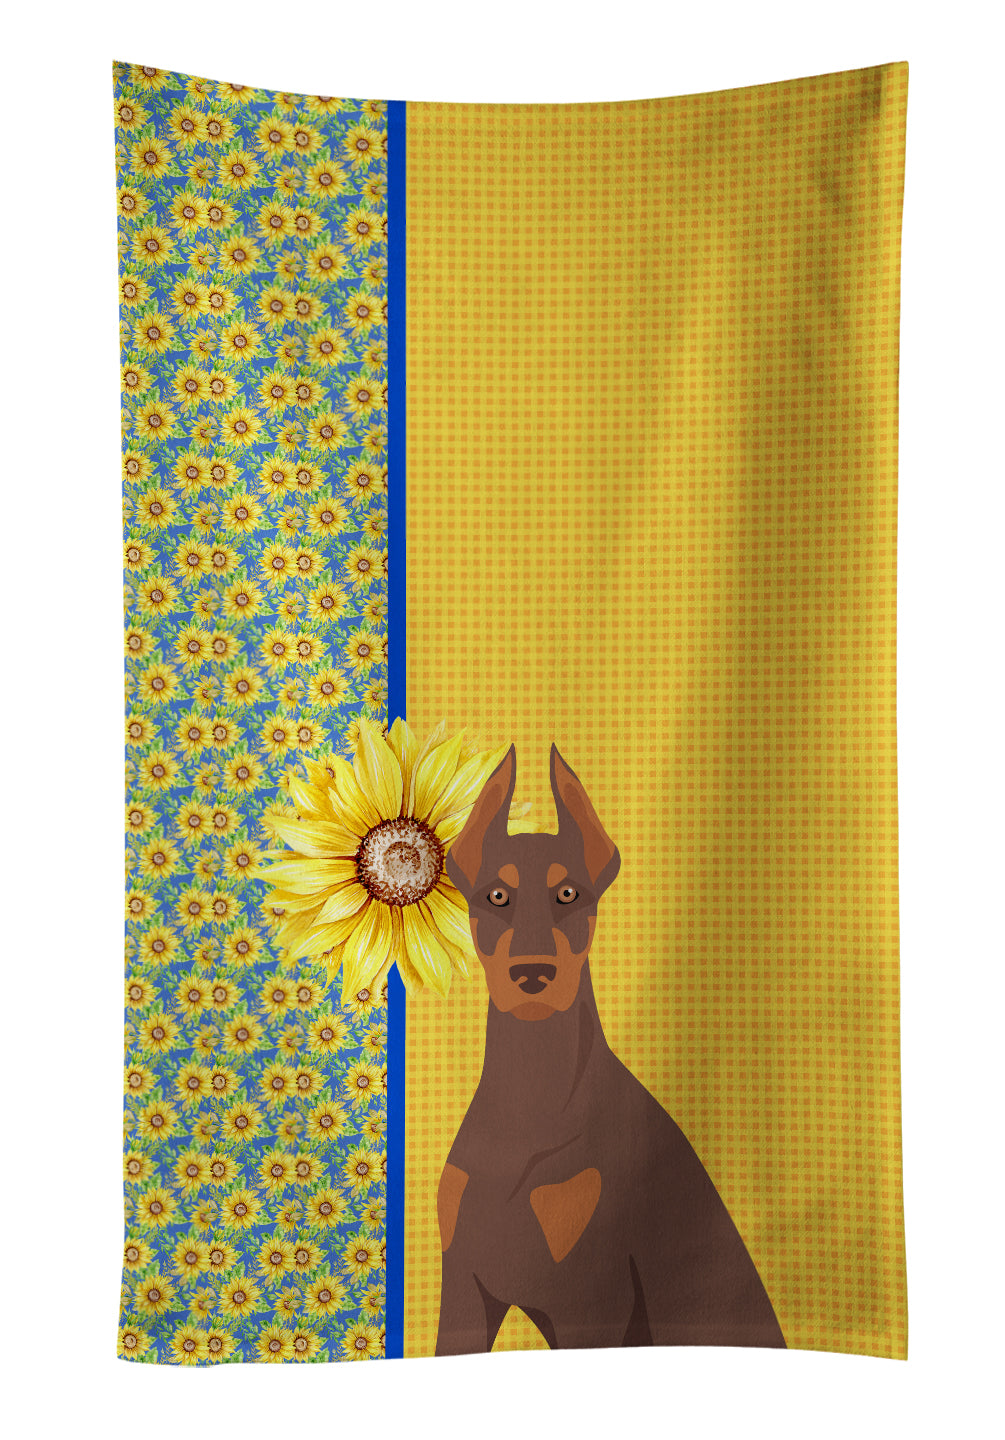 Buy this Summer Sunflowers Red and Tan Doberman Pinscher Kitchen Towel